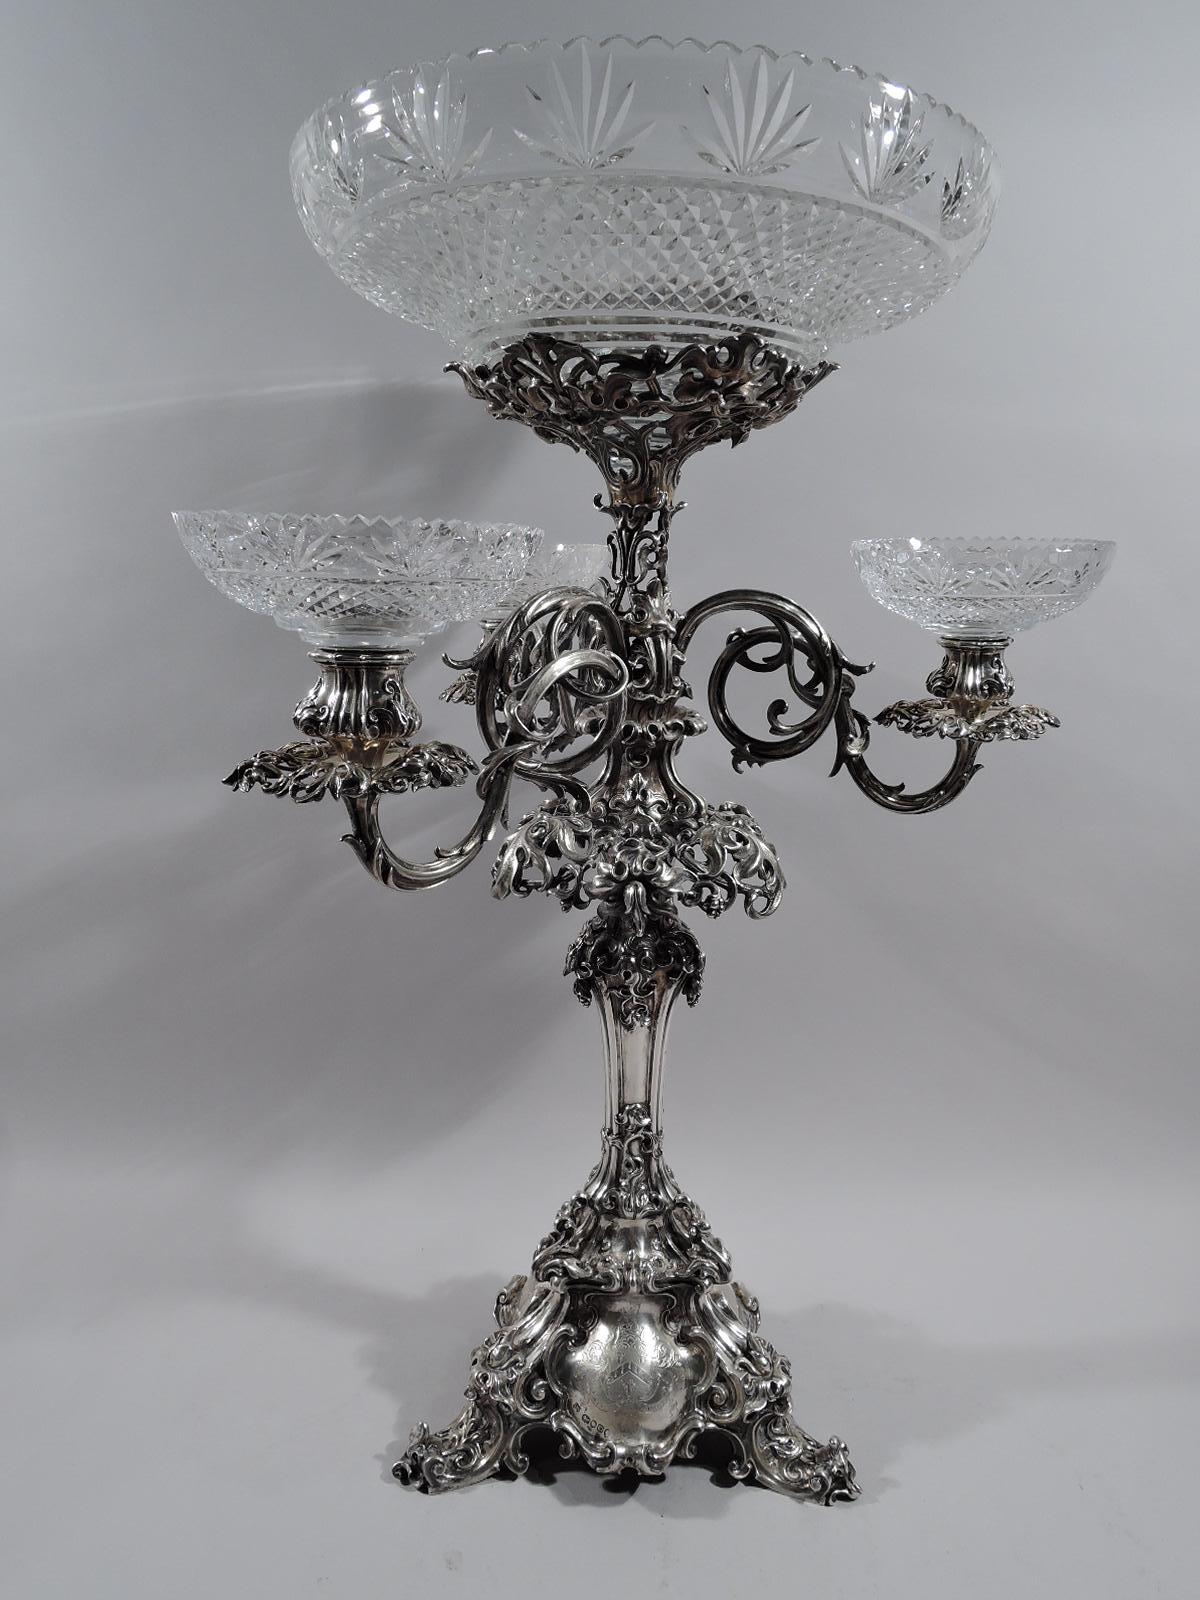 Victorian sterling silver epergne candelabrum. Made by Barnard & Sons in London in 1849.

Shaped shaft with flange and stepped triangular base terminating in 3 scrolled supports. Raised and large central glass basket in support surrounded on 3